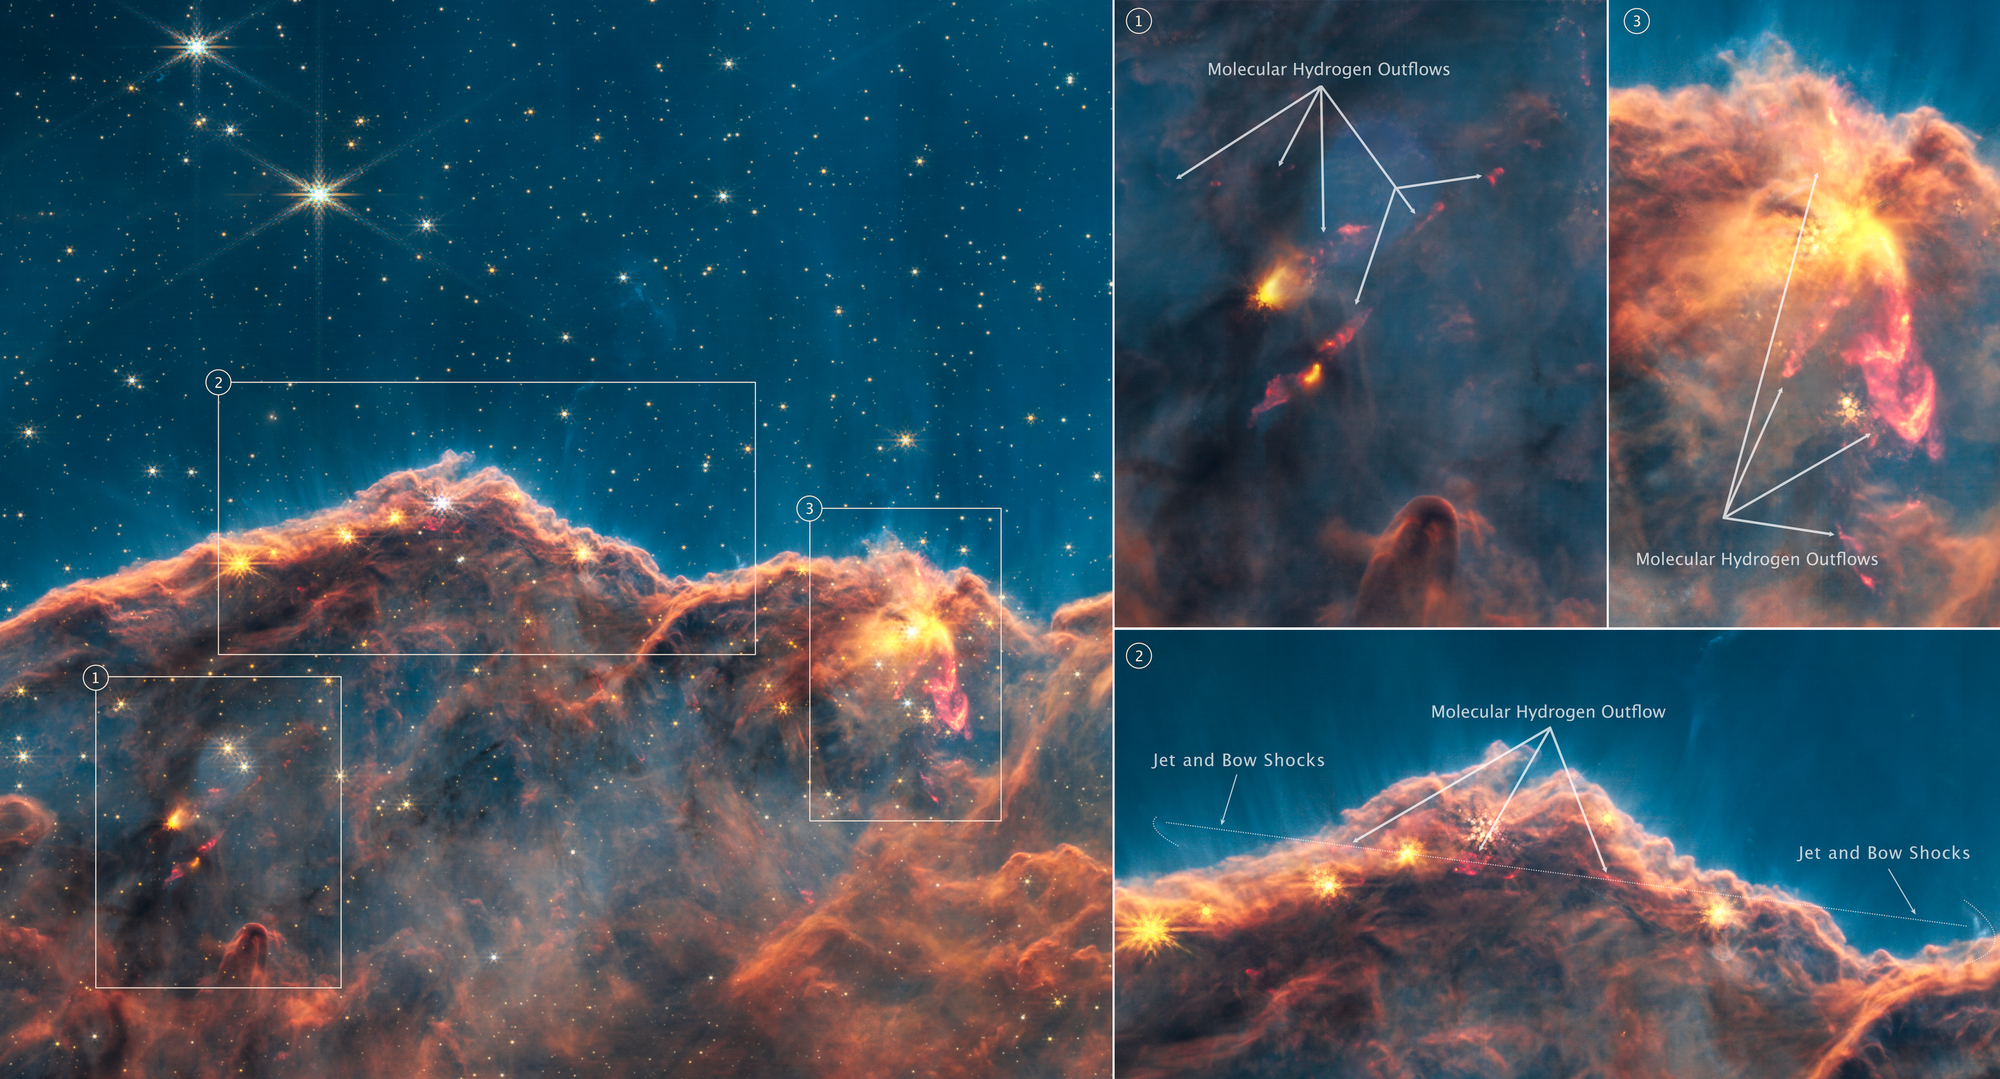 A collage image of the Carina Nebula, an undulating, translucent star-forming region, hued in ambers and blues; foreground stars with diffraction spikes can be seen, as can a speckling of background points of light through the cloudy nebula.